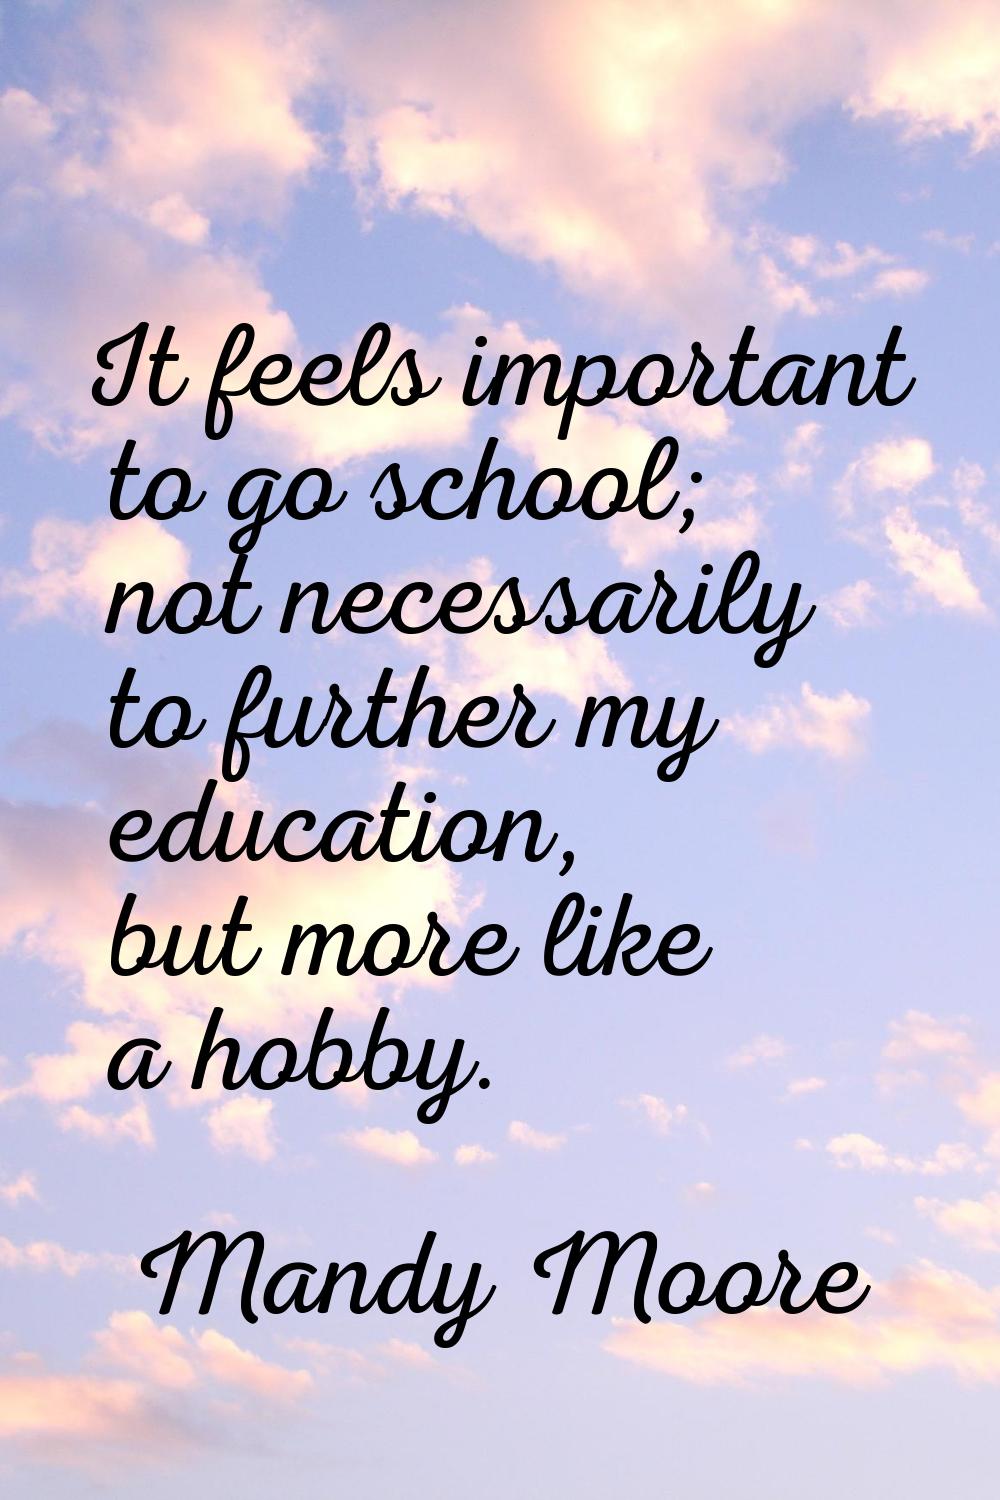 It feels important to go school; not necessarily to further my education, but more like a hobby.